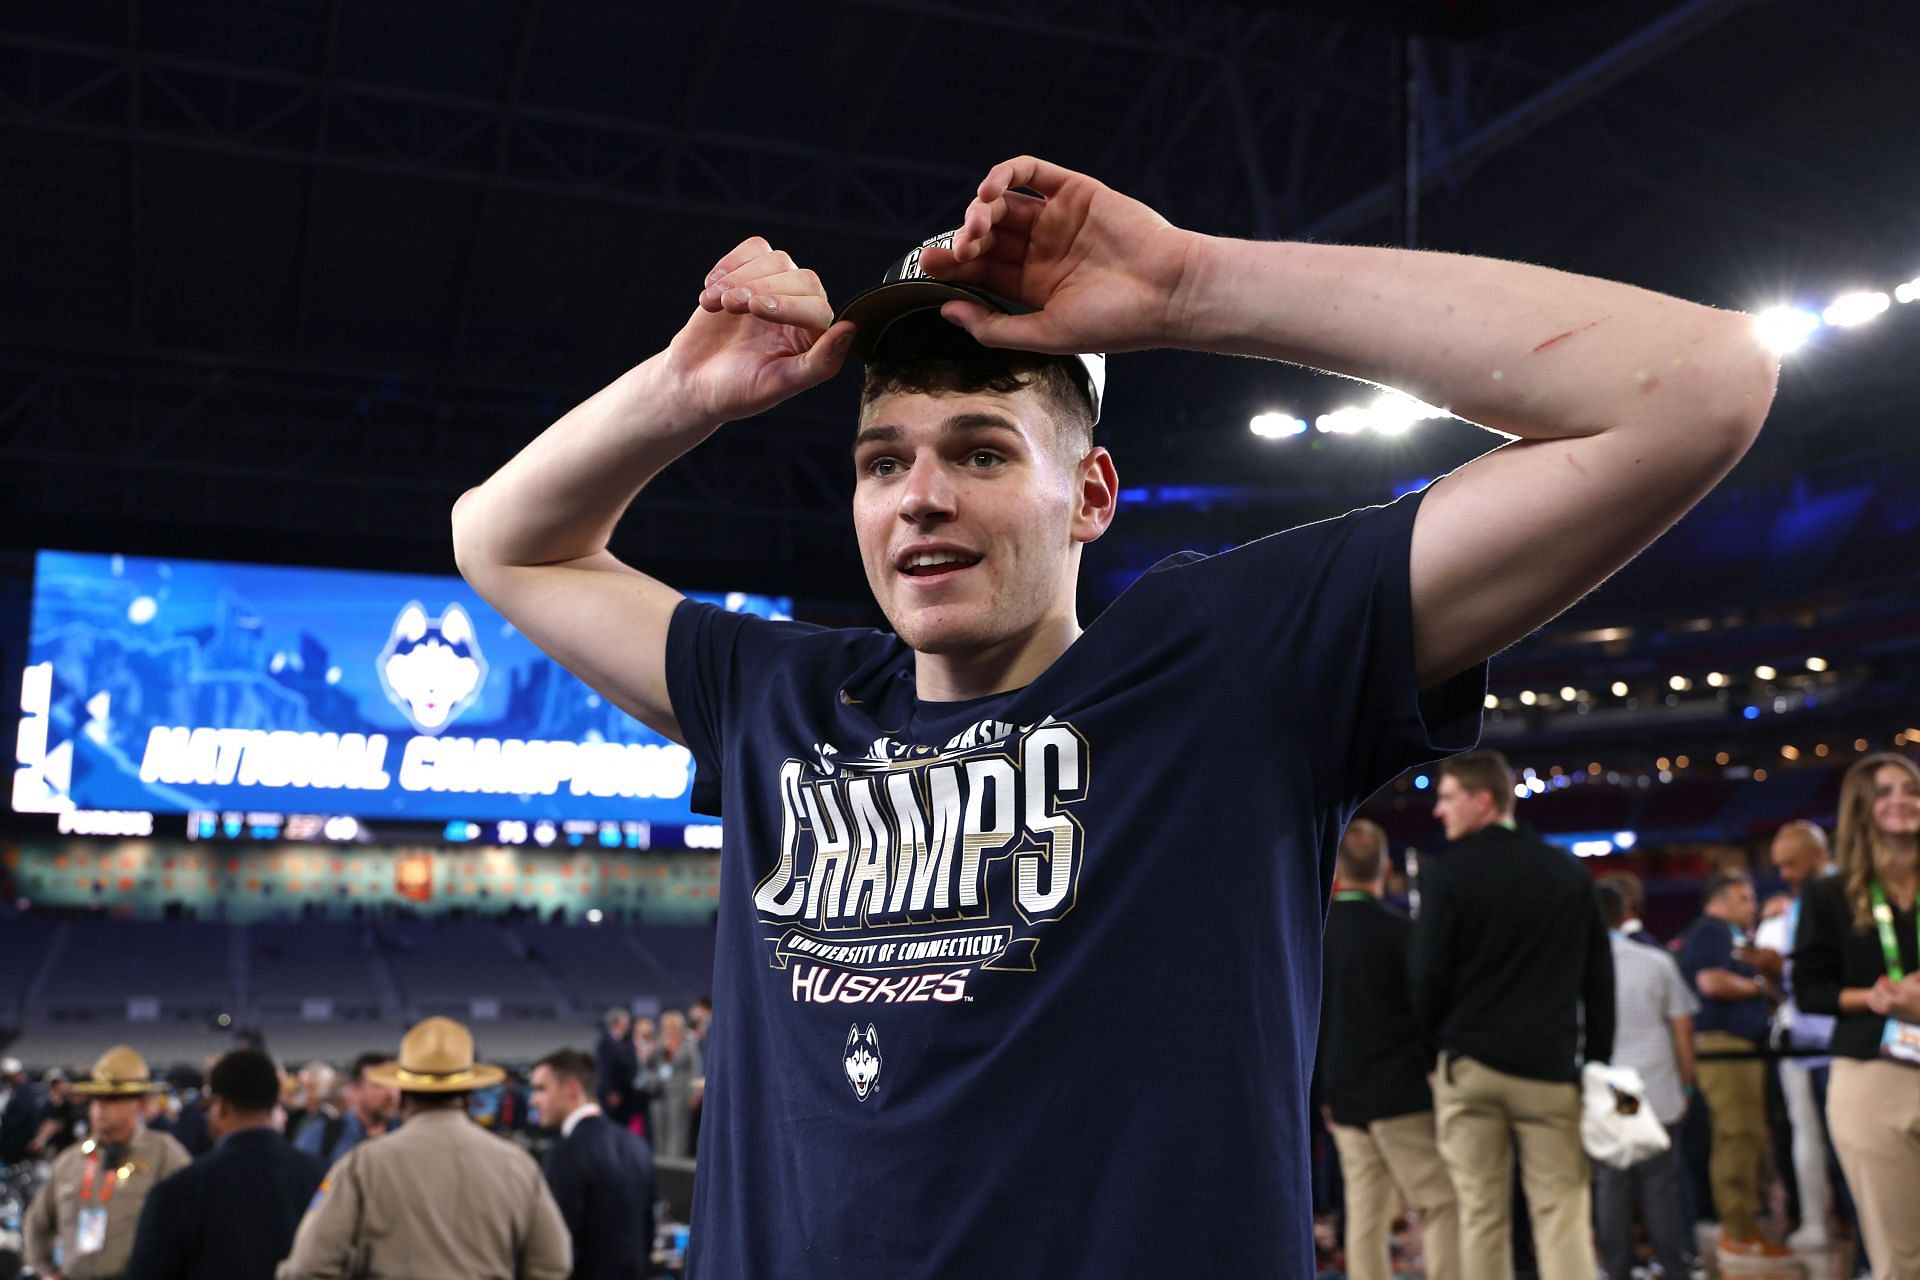 UConn would need a replacement for Donovan Clingan, who declared for the NBA Draft. Pryor may lack the size of the 7-foot-2 cager but he can provide the energy at the post that Dan Hurley needed to have a chance of making it three in a row next season.